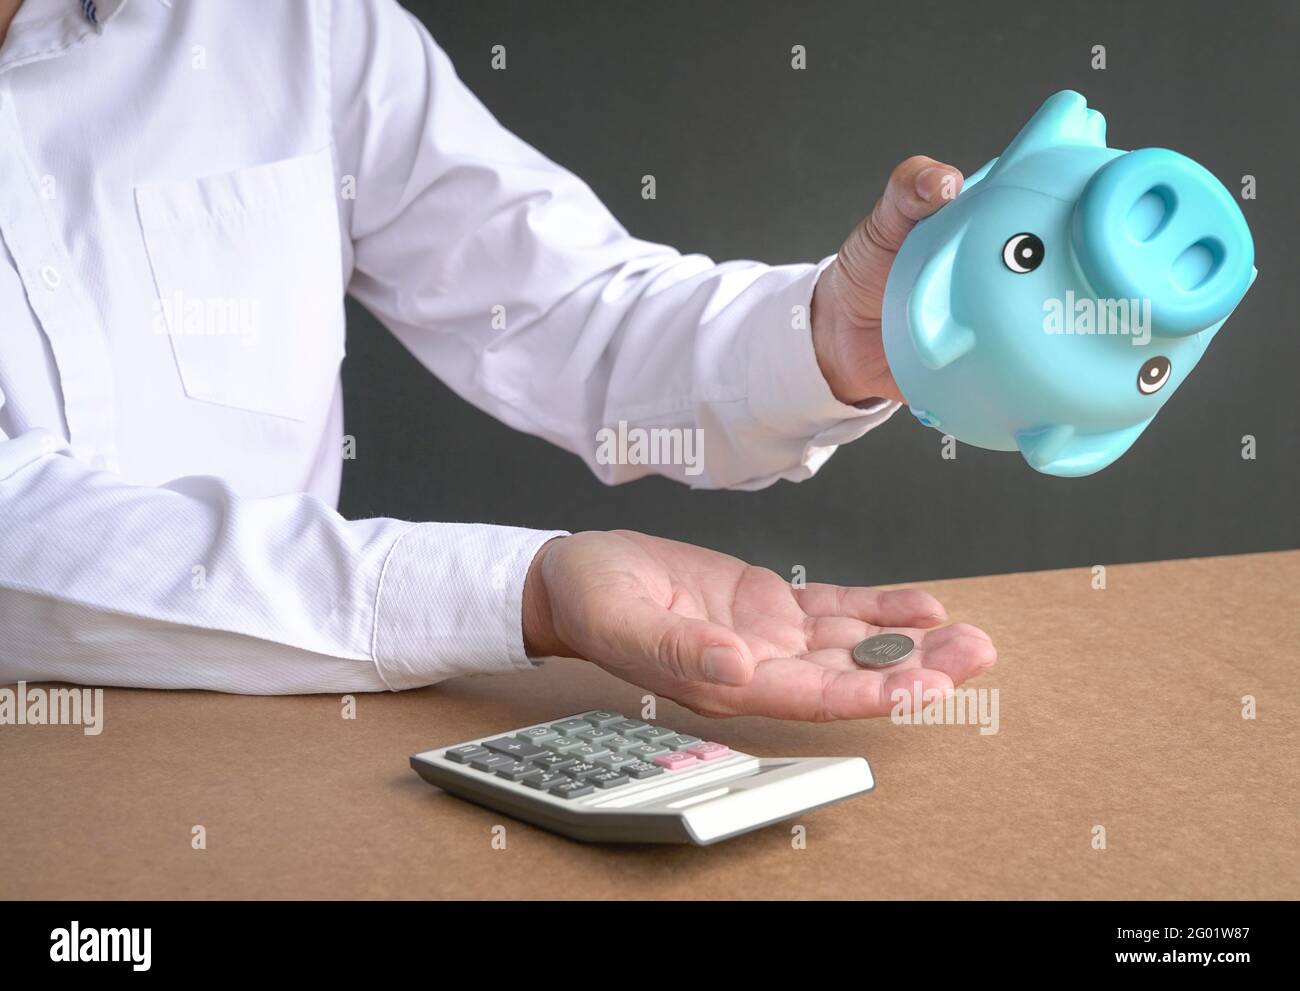 Businessman emptying piggybank savings. Only one coin left. Broke or financial crisis concept. Stock Photo